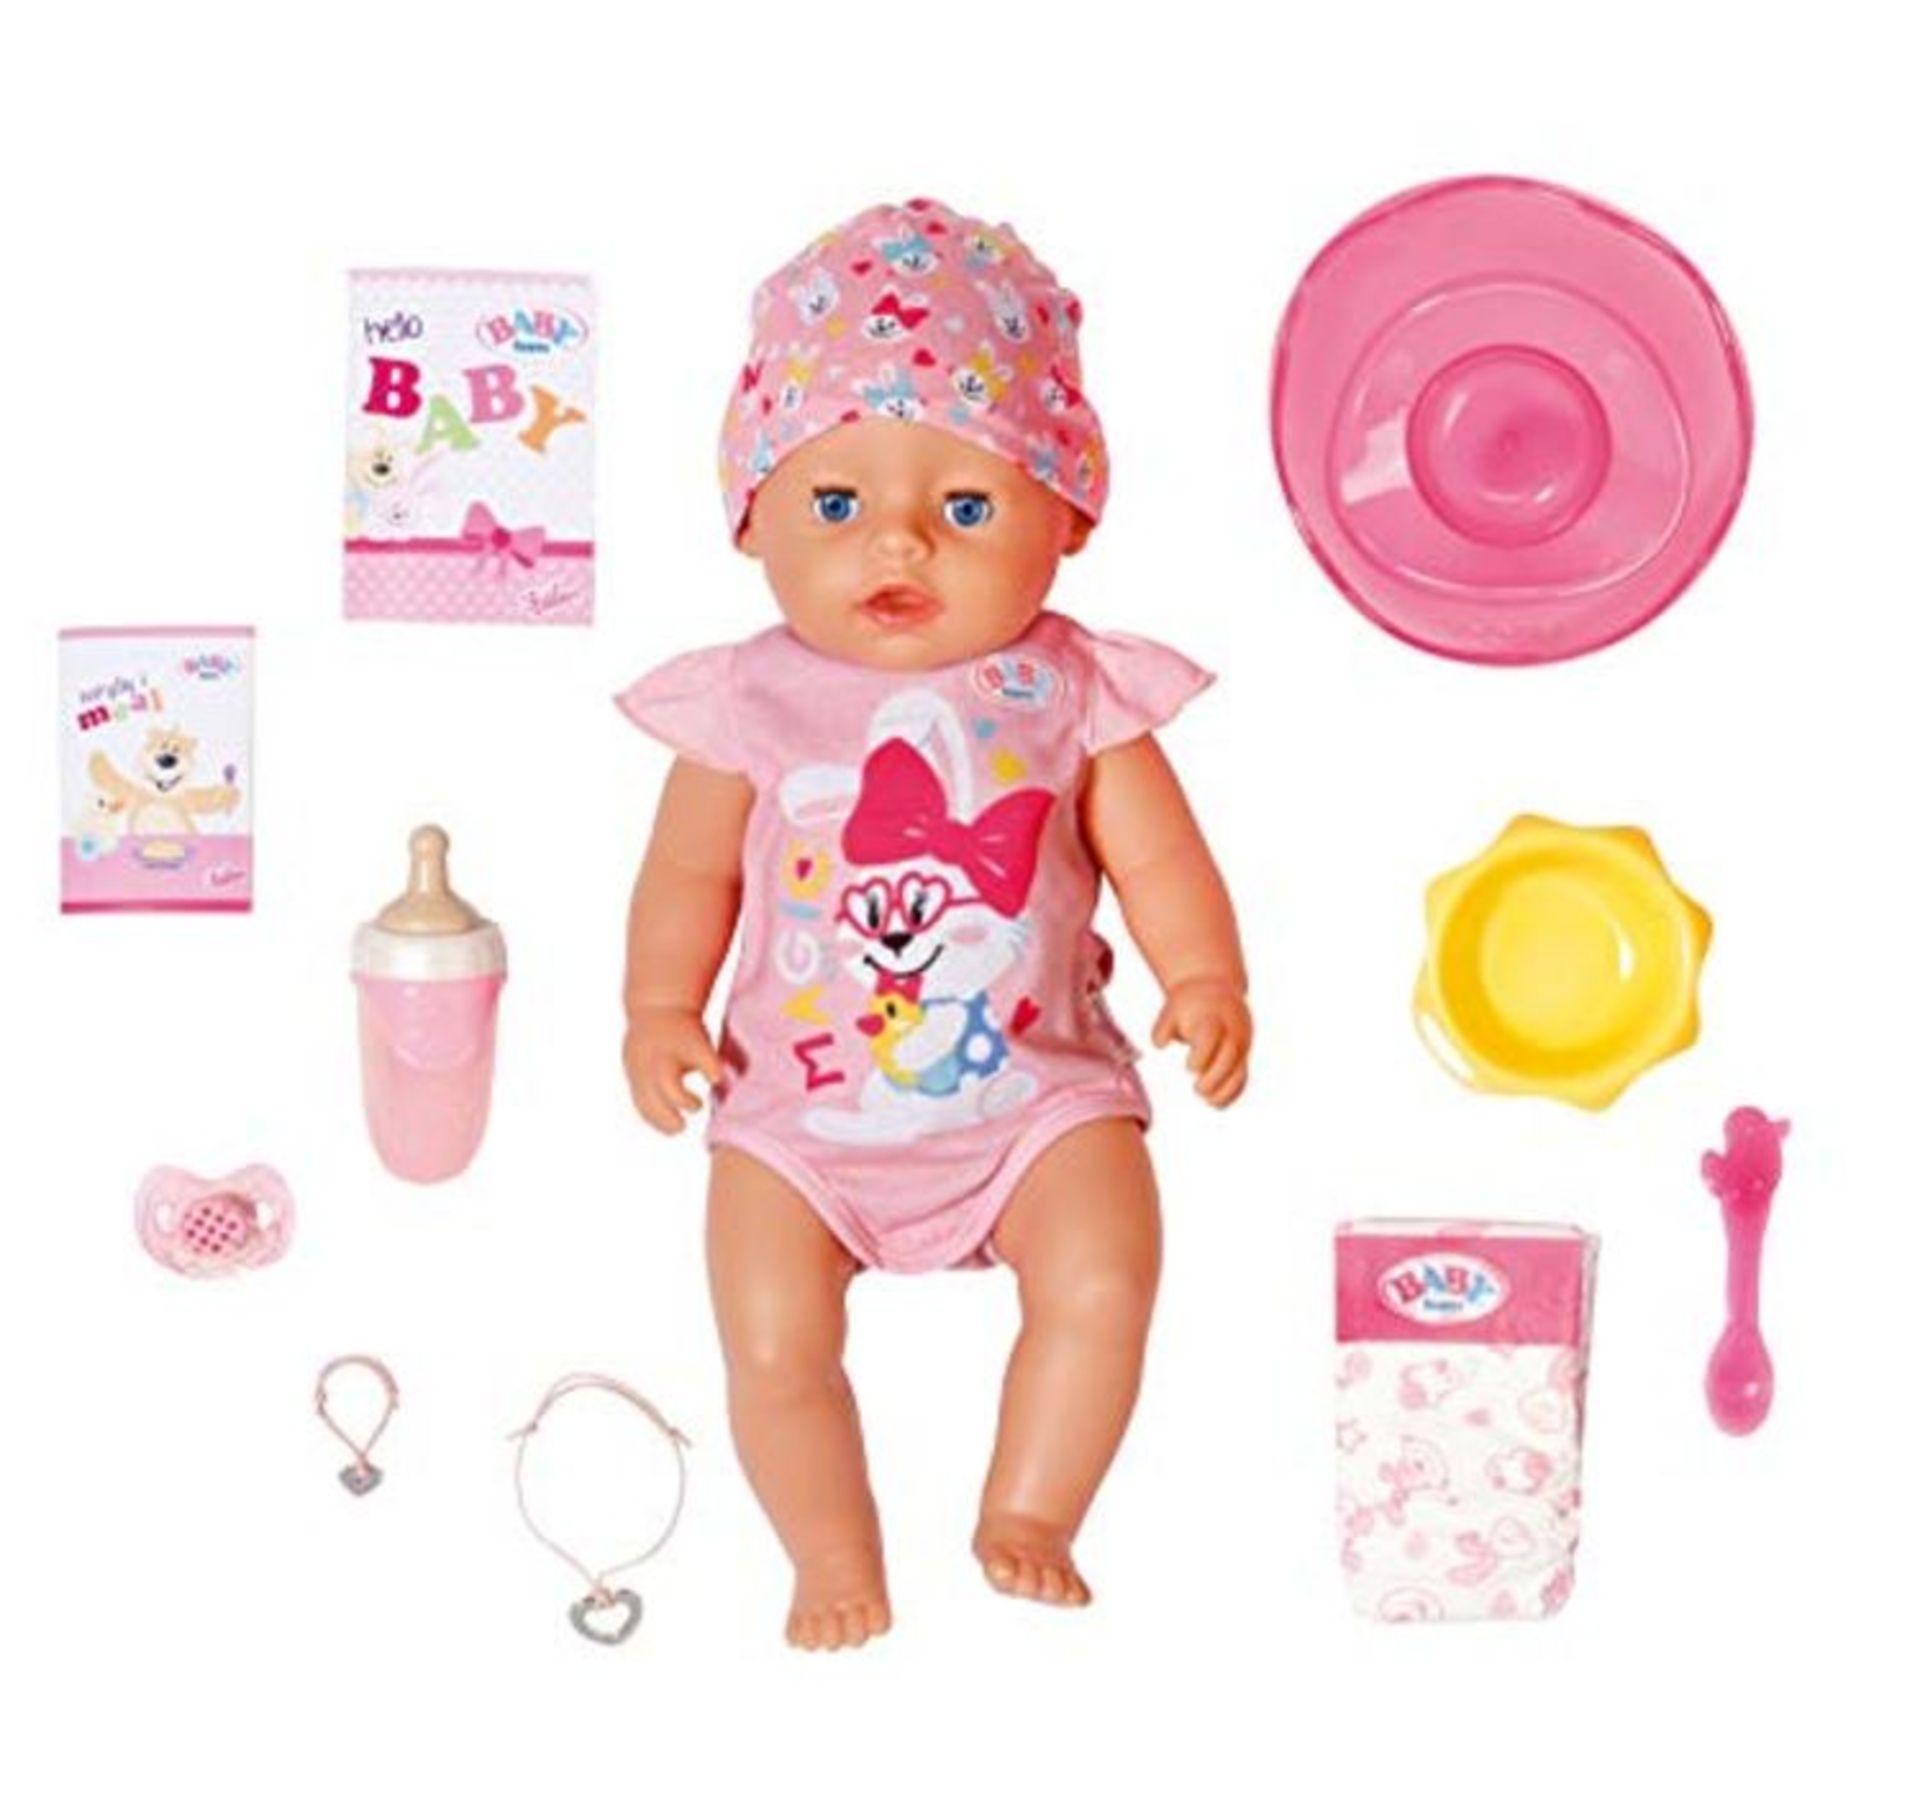 BABY born 827956 43cm Dummy-Realistic Doll with Lifelike Functions-Soft to The Touch,